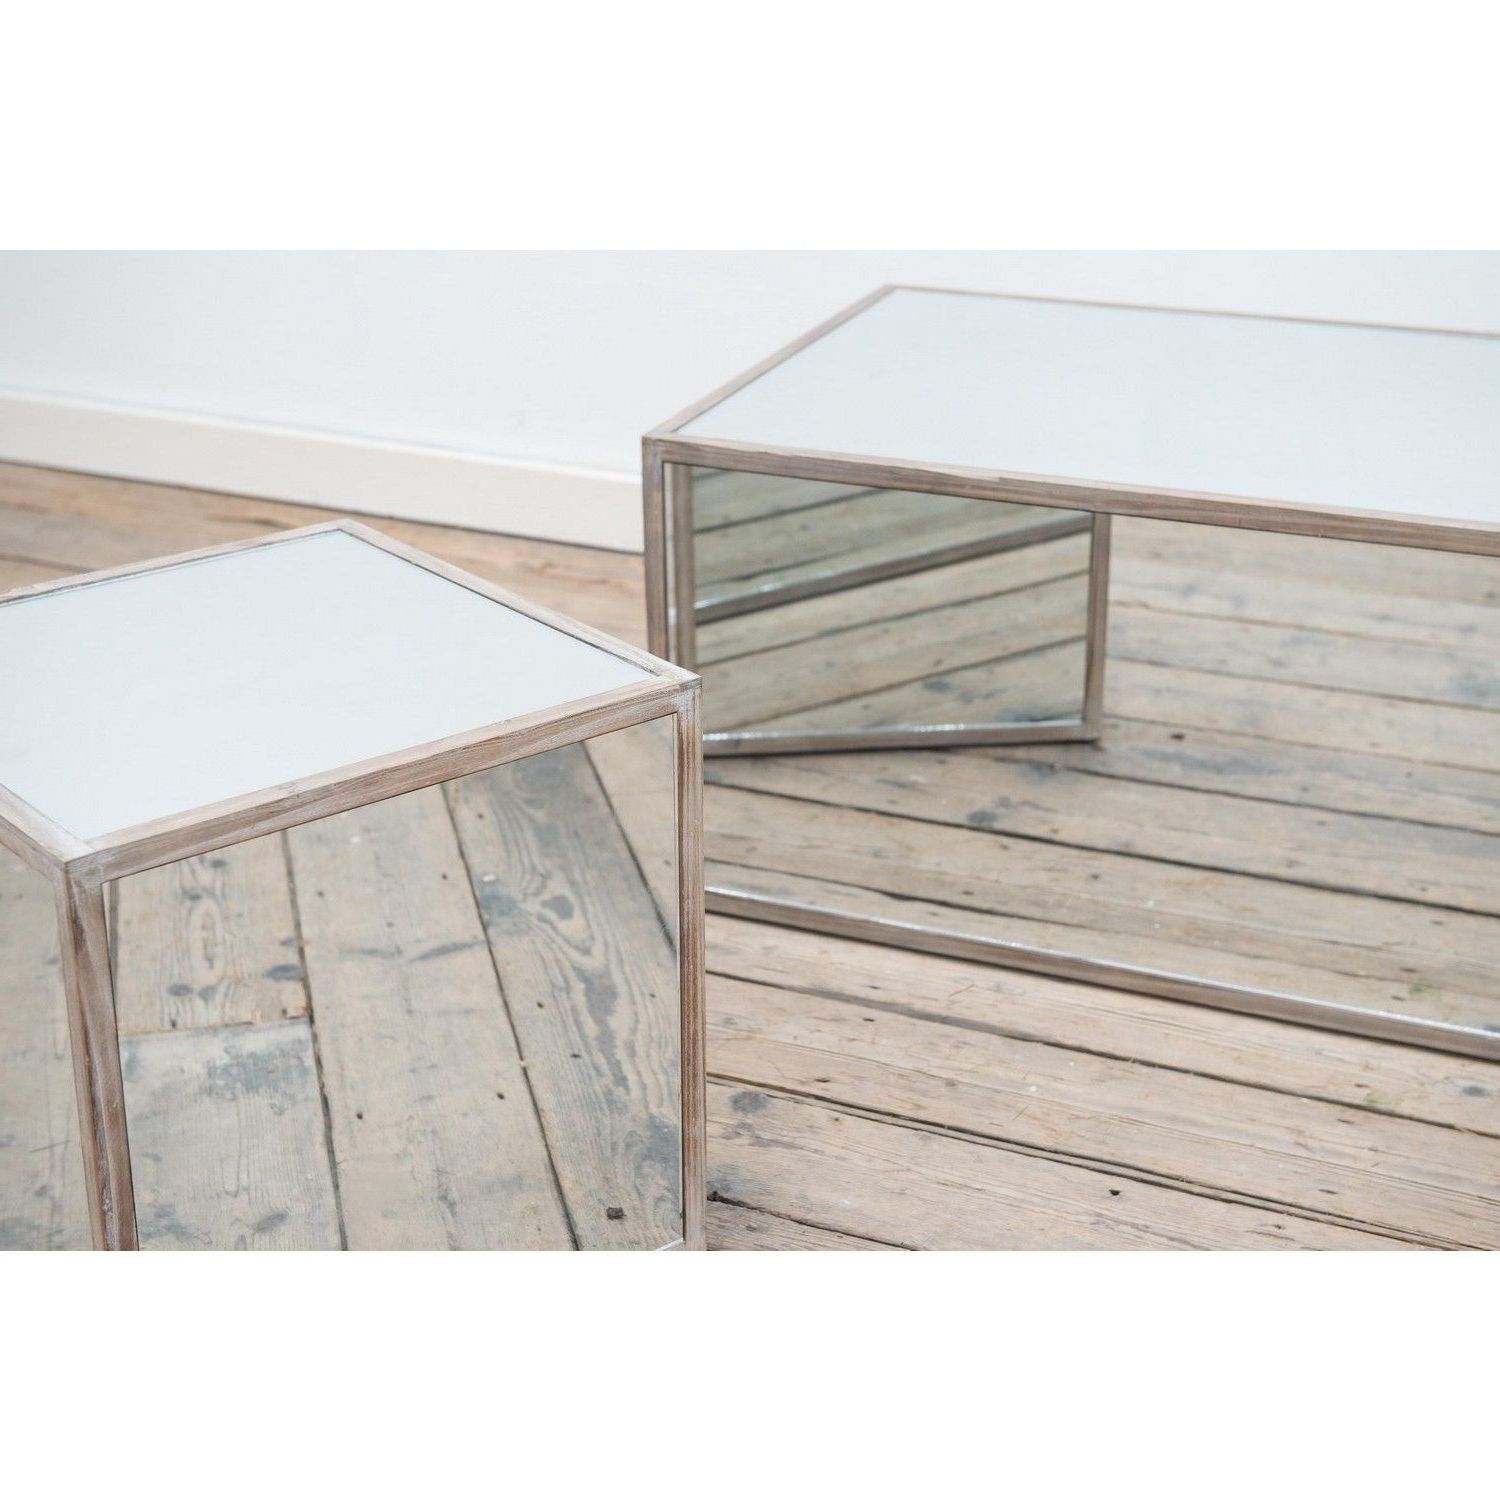 Geometric White Coffee Tables In Popular Geometric Mirrored Square Cube Small Coffee Table (View 9 of 10)